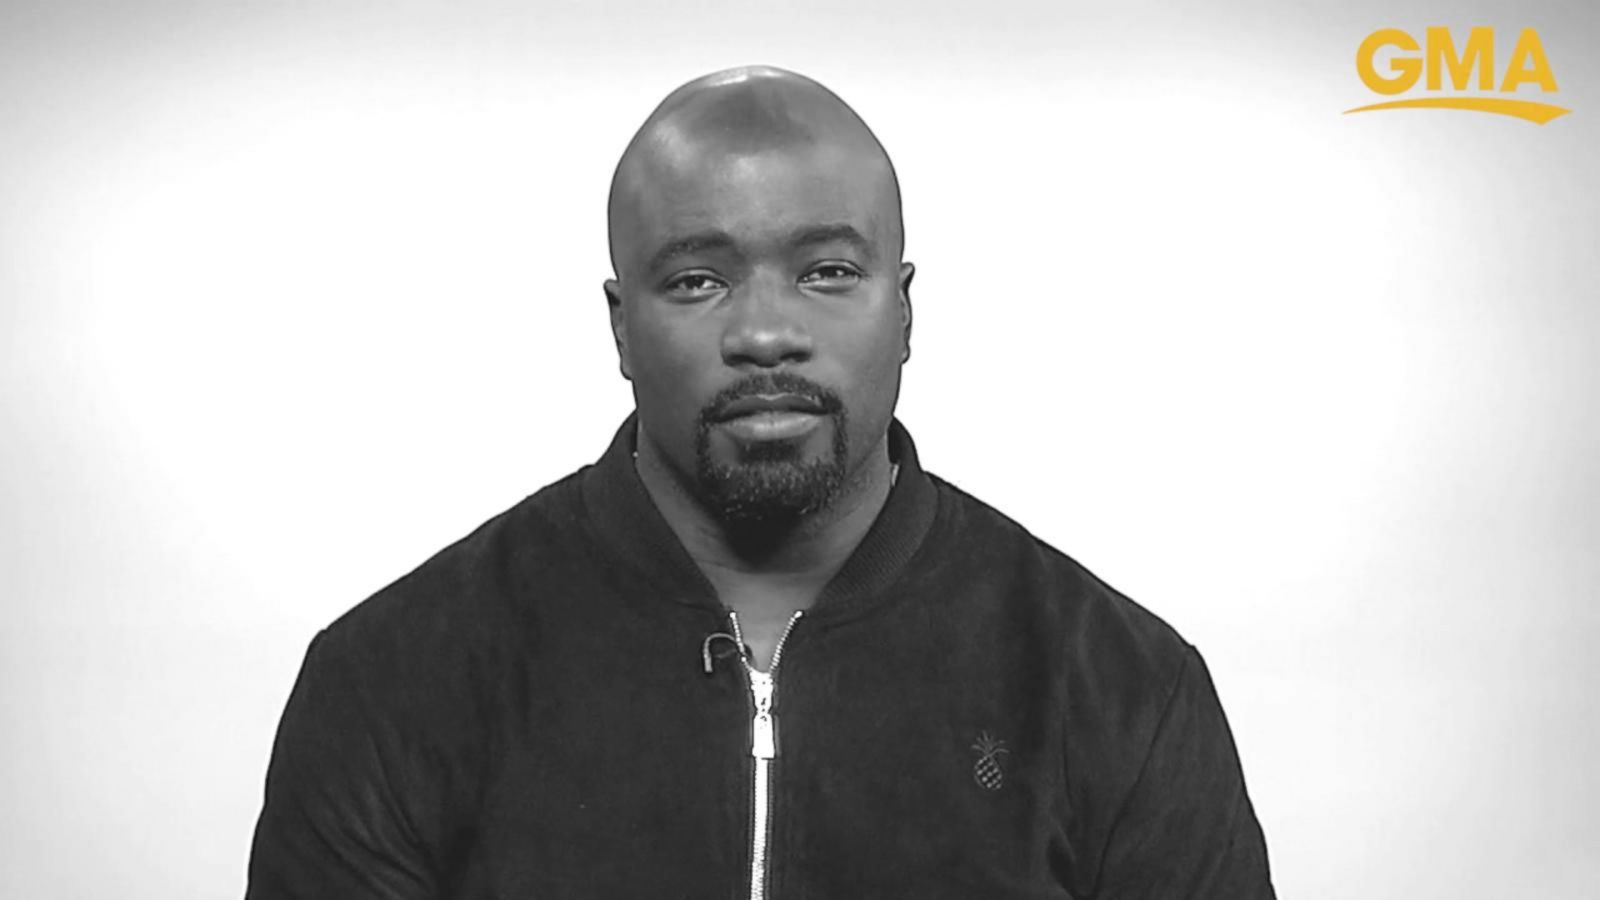 VIDEO: 'On Their Shoulders:' Mike Colter, star of "Luke Cage" honors 4 black trailblazers